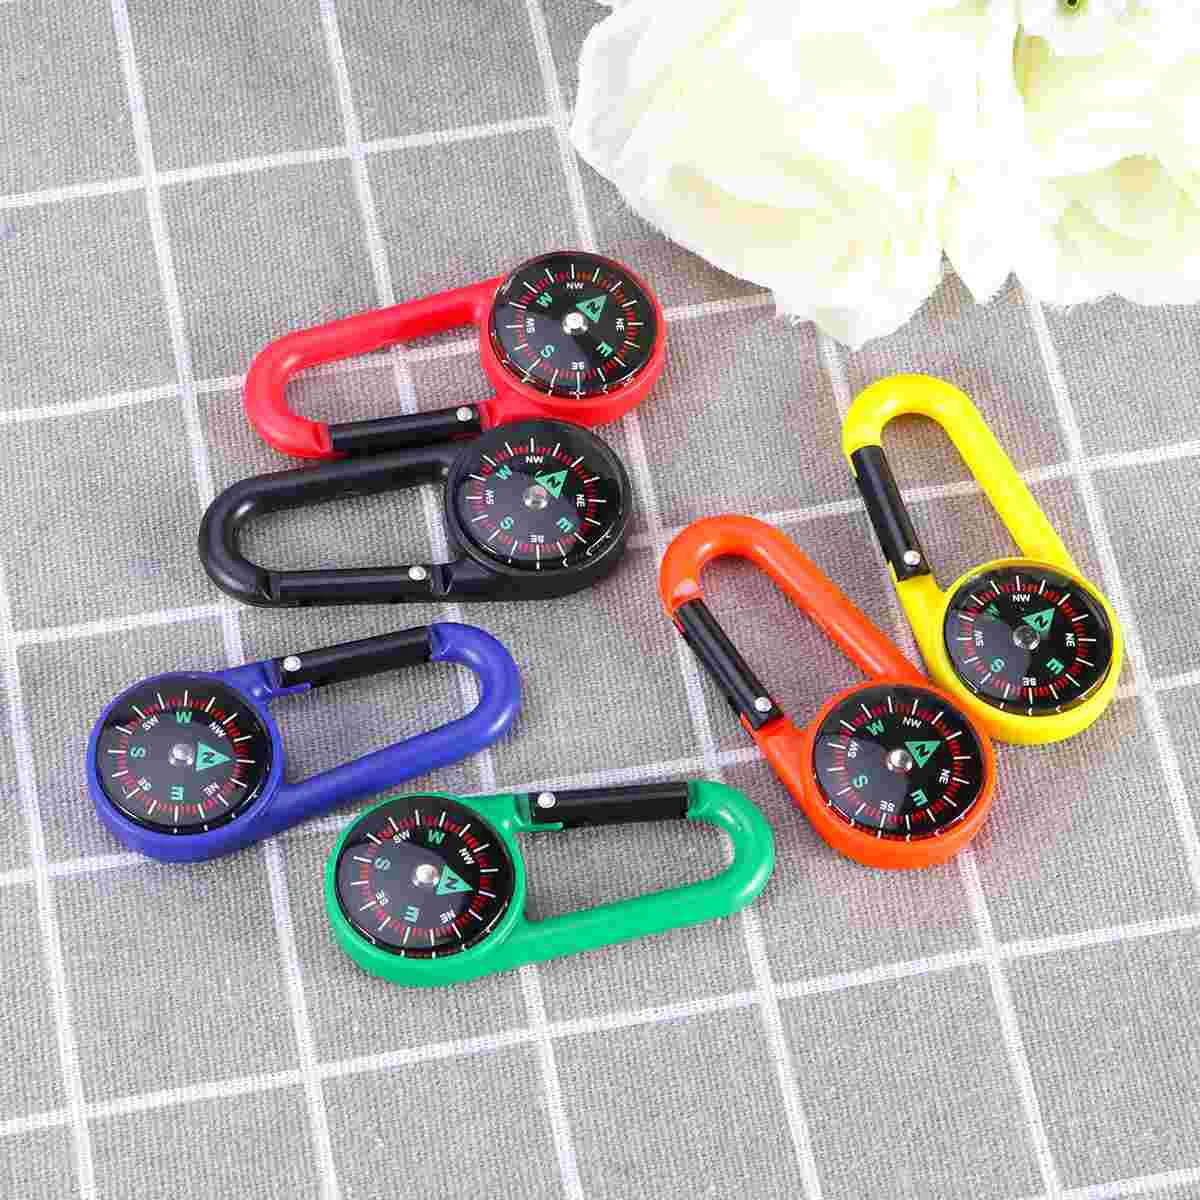 

Compass Carabiner Supplies Camping Accessories Hiking Outdoor Favors Party Prizes School Chain Key Filled Liquid Keyring Hook